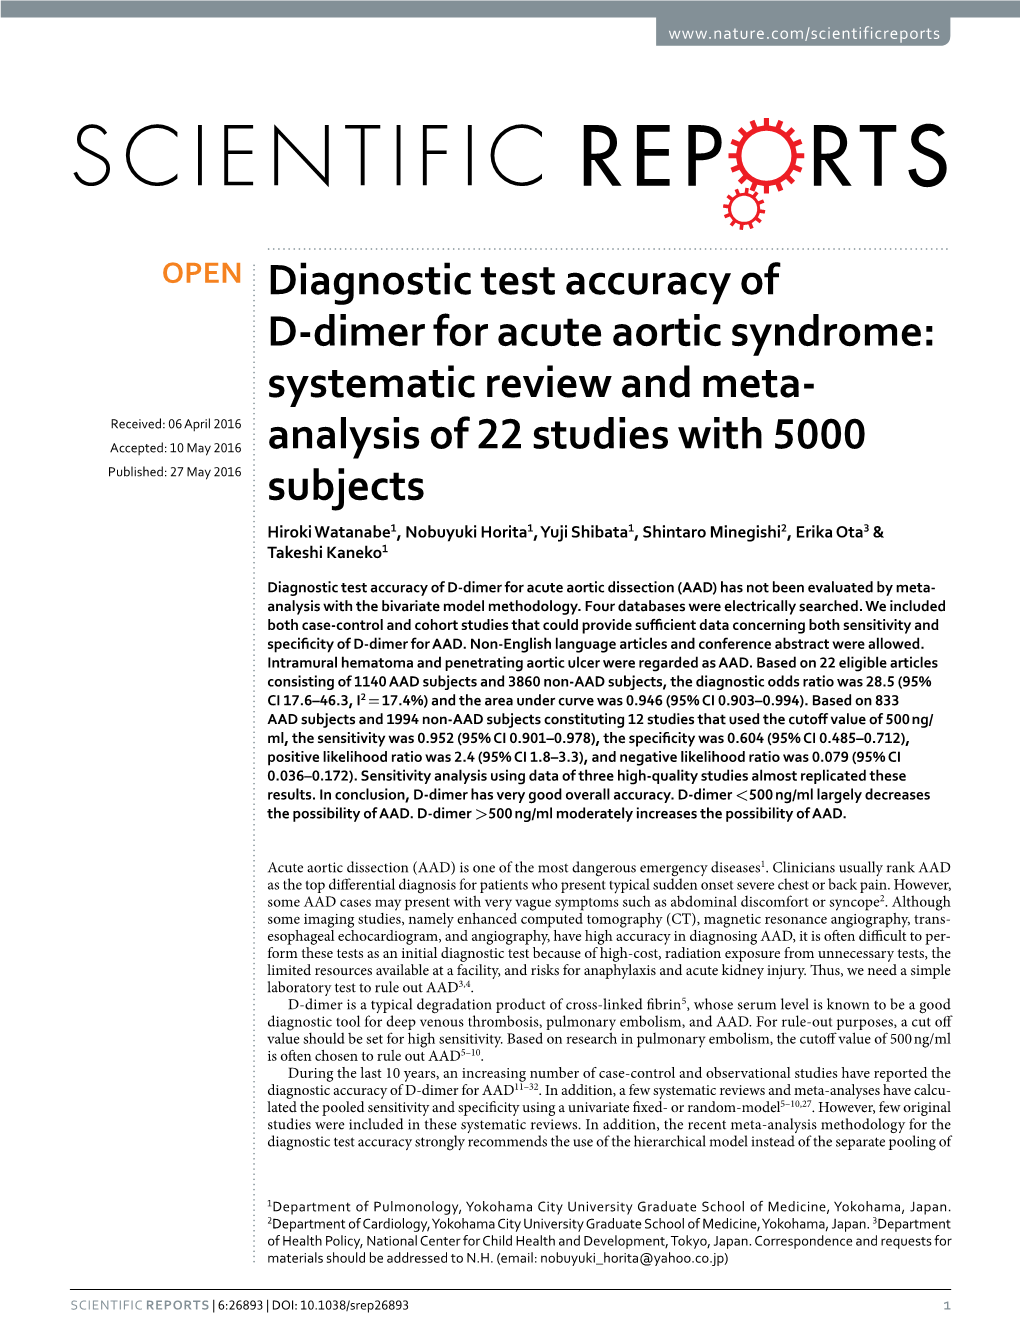 Diagnostic Test Accuracy of D-Dimer for Acute Aortic Syndrome